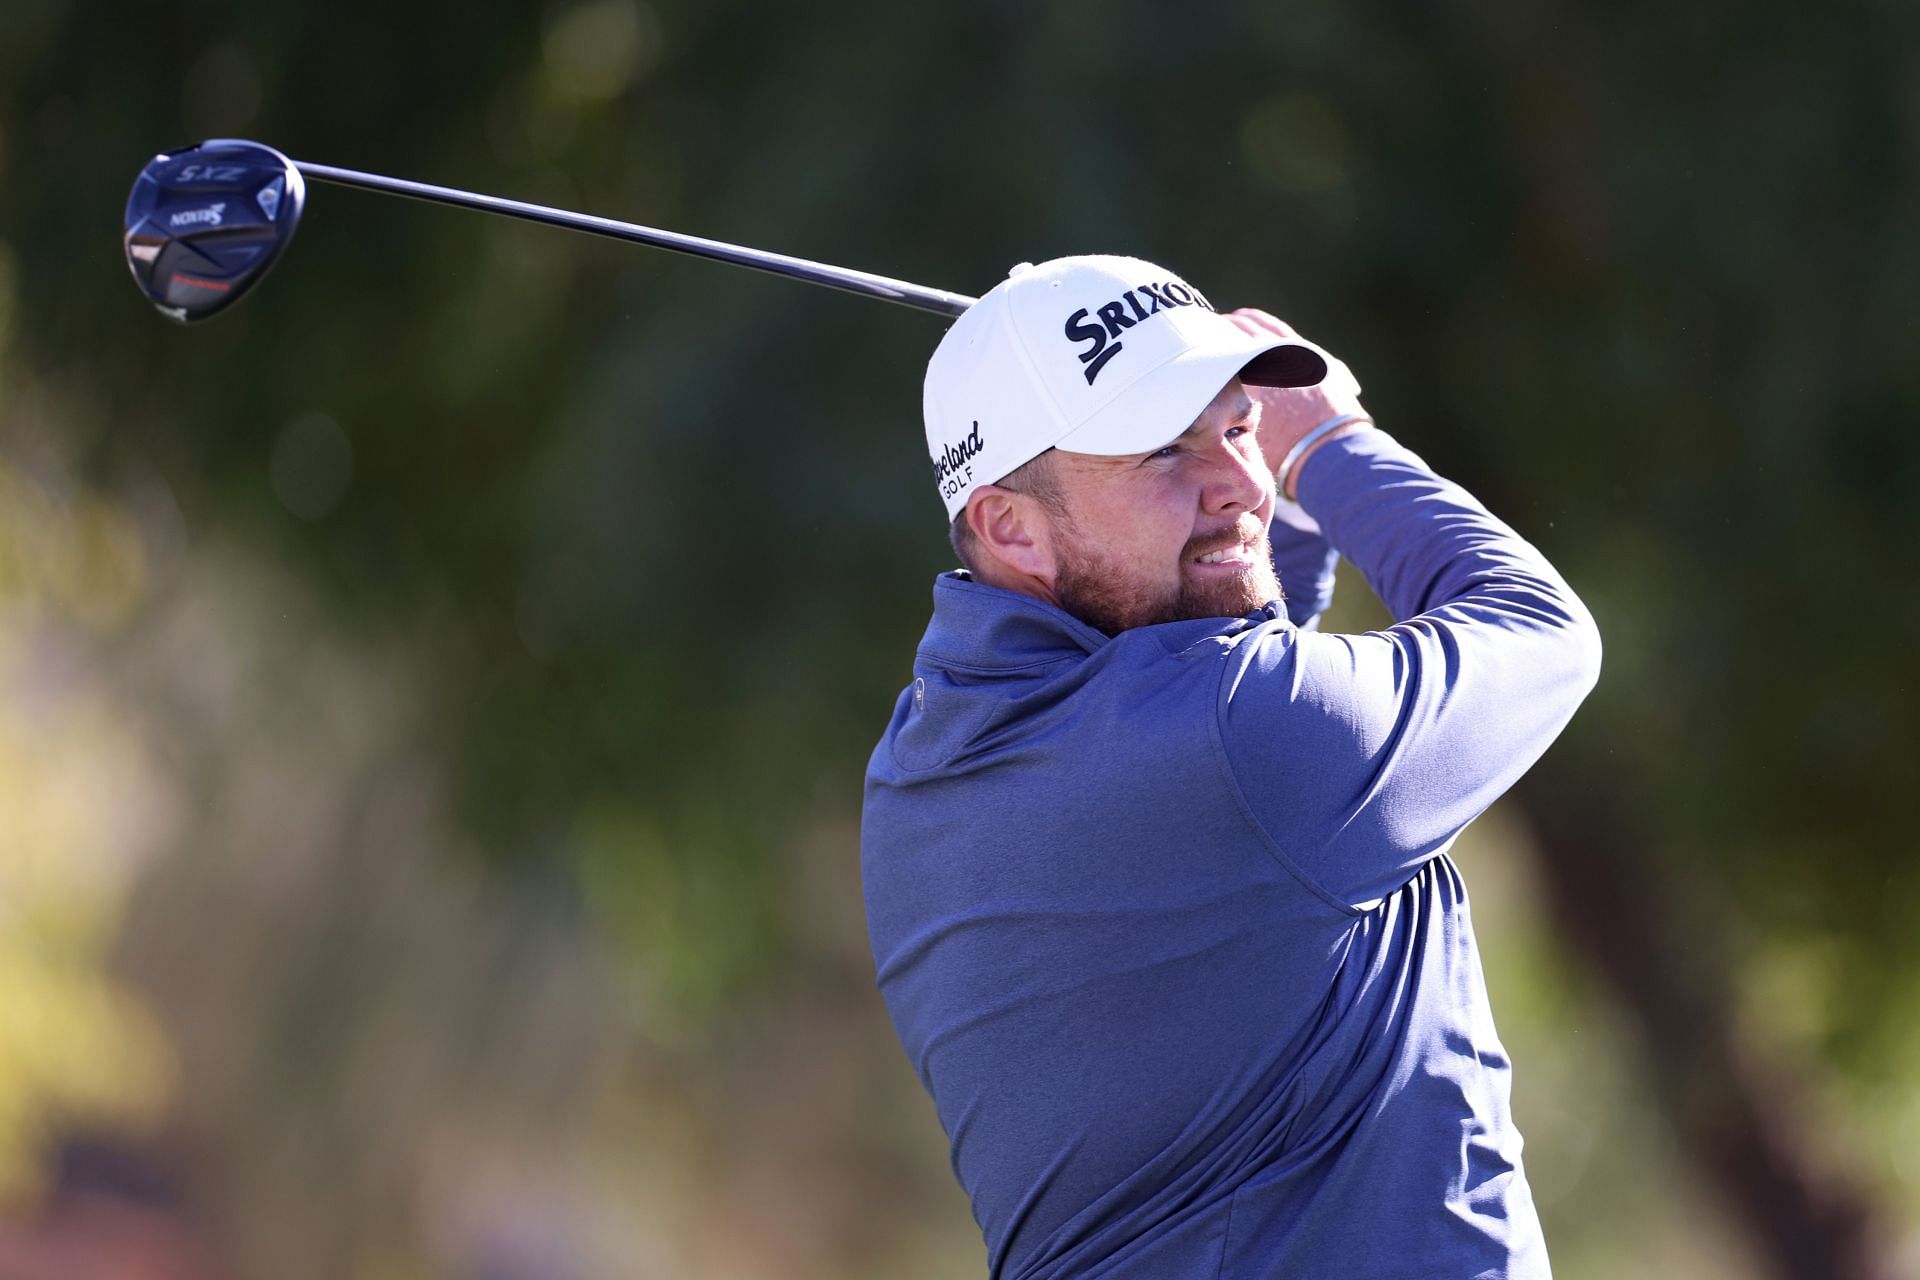 Shane Lowry at the WM Phoenix Open - Round One (Image via Steph Chambers/Getty Images)